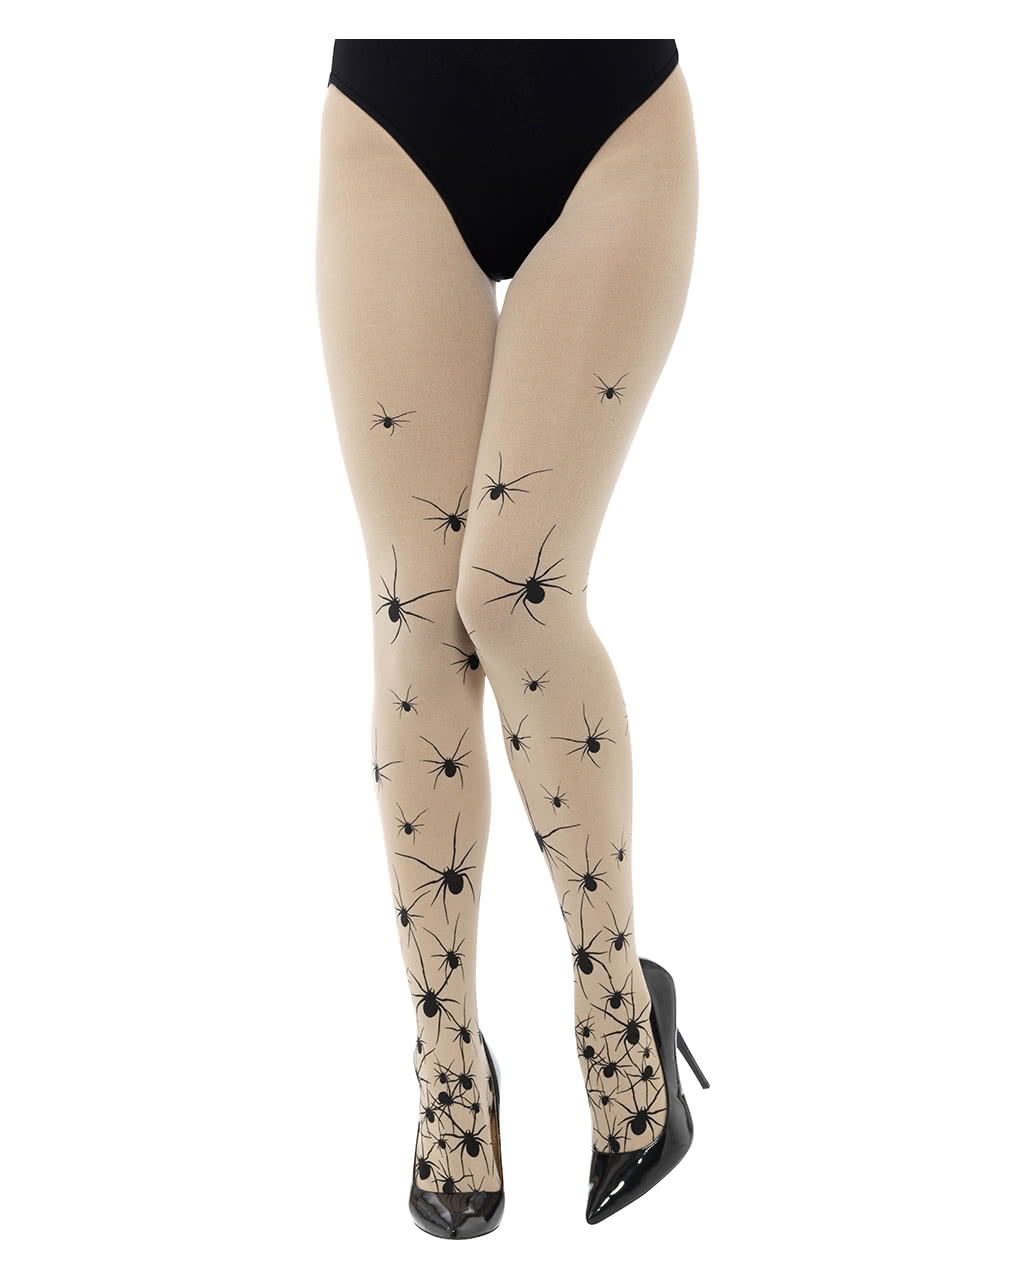 Pantyhose With Spider Print for Gothic & Halloween Party